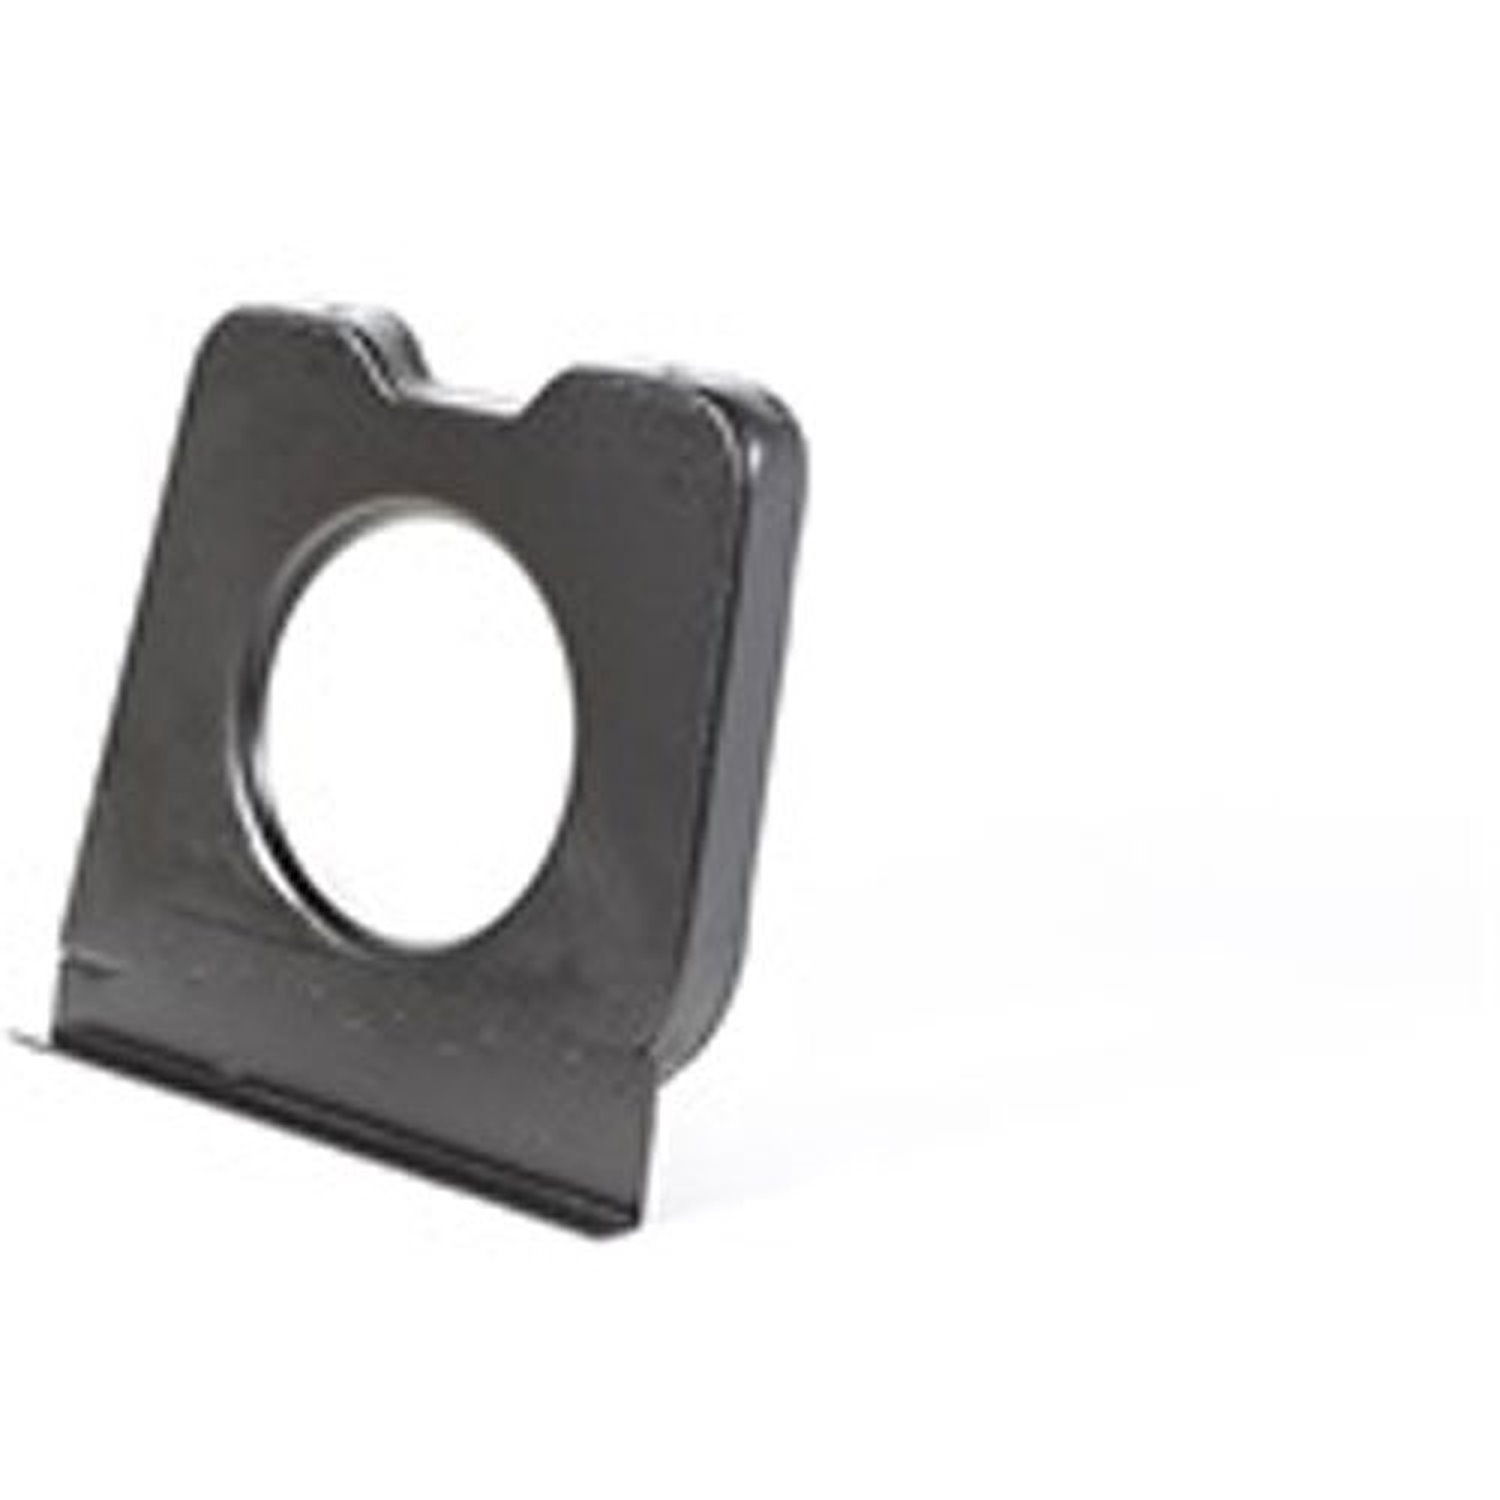 This spare tire carrier bracket from Omix-ADA fits Jeep CJ-5s.